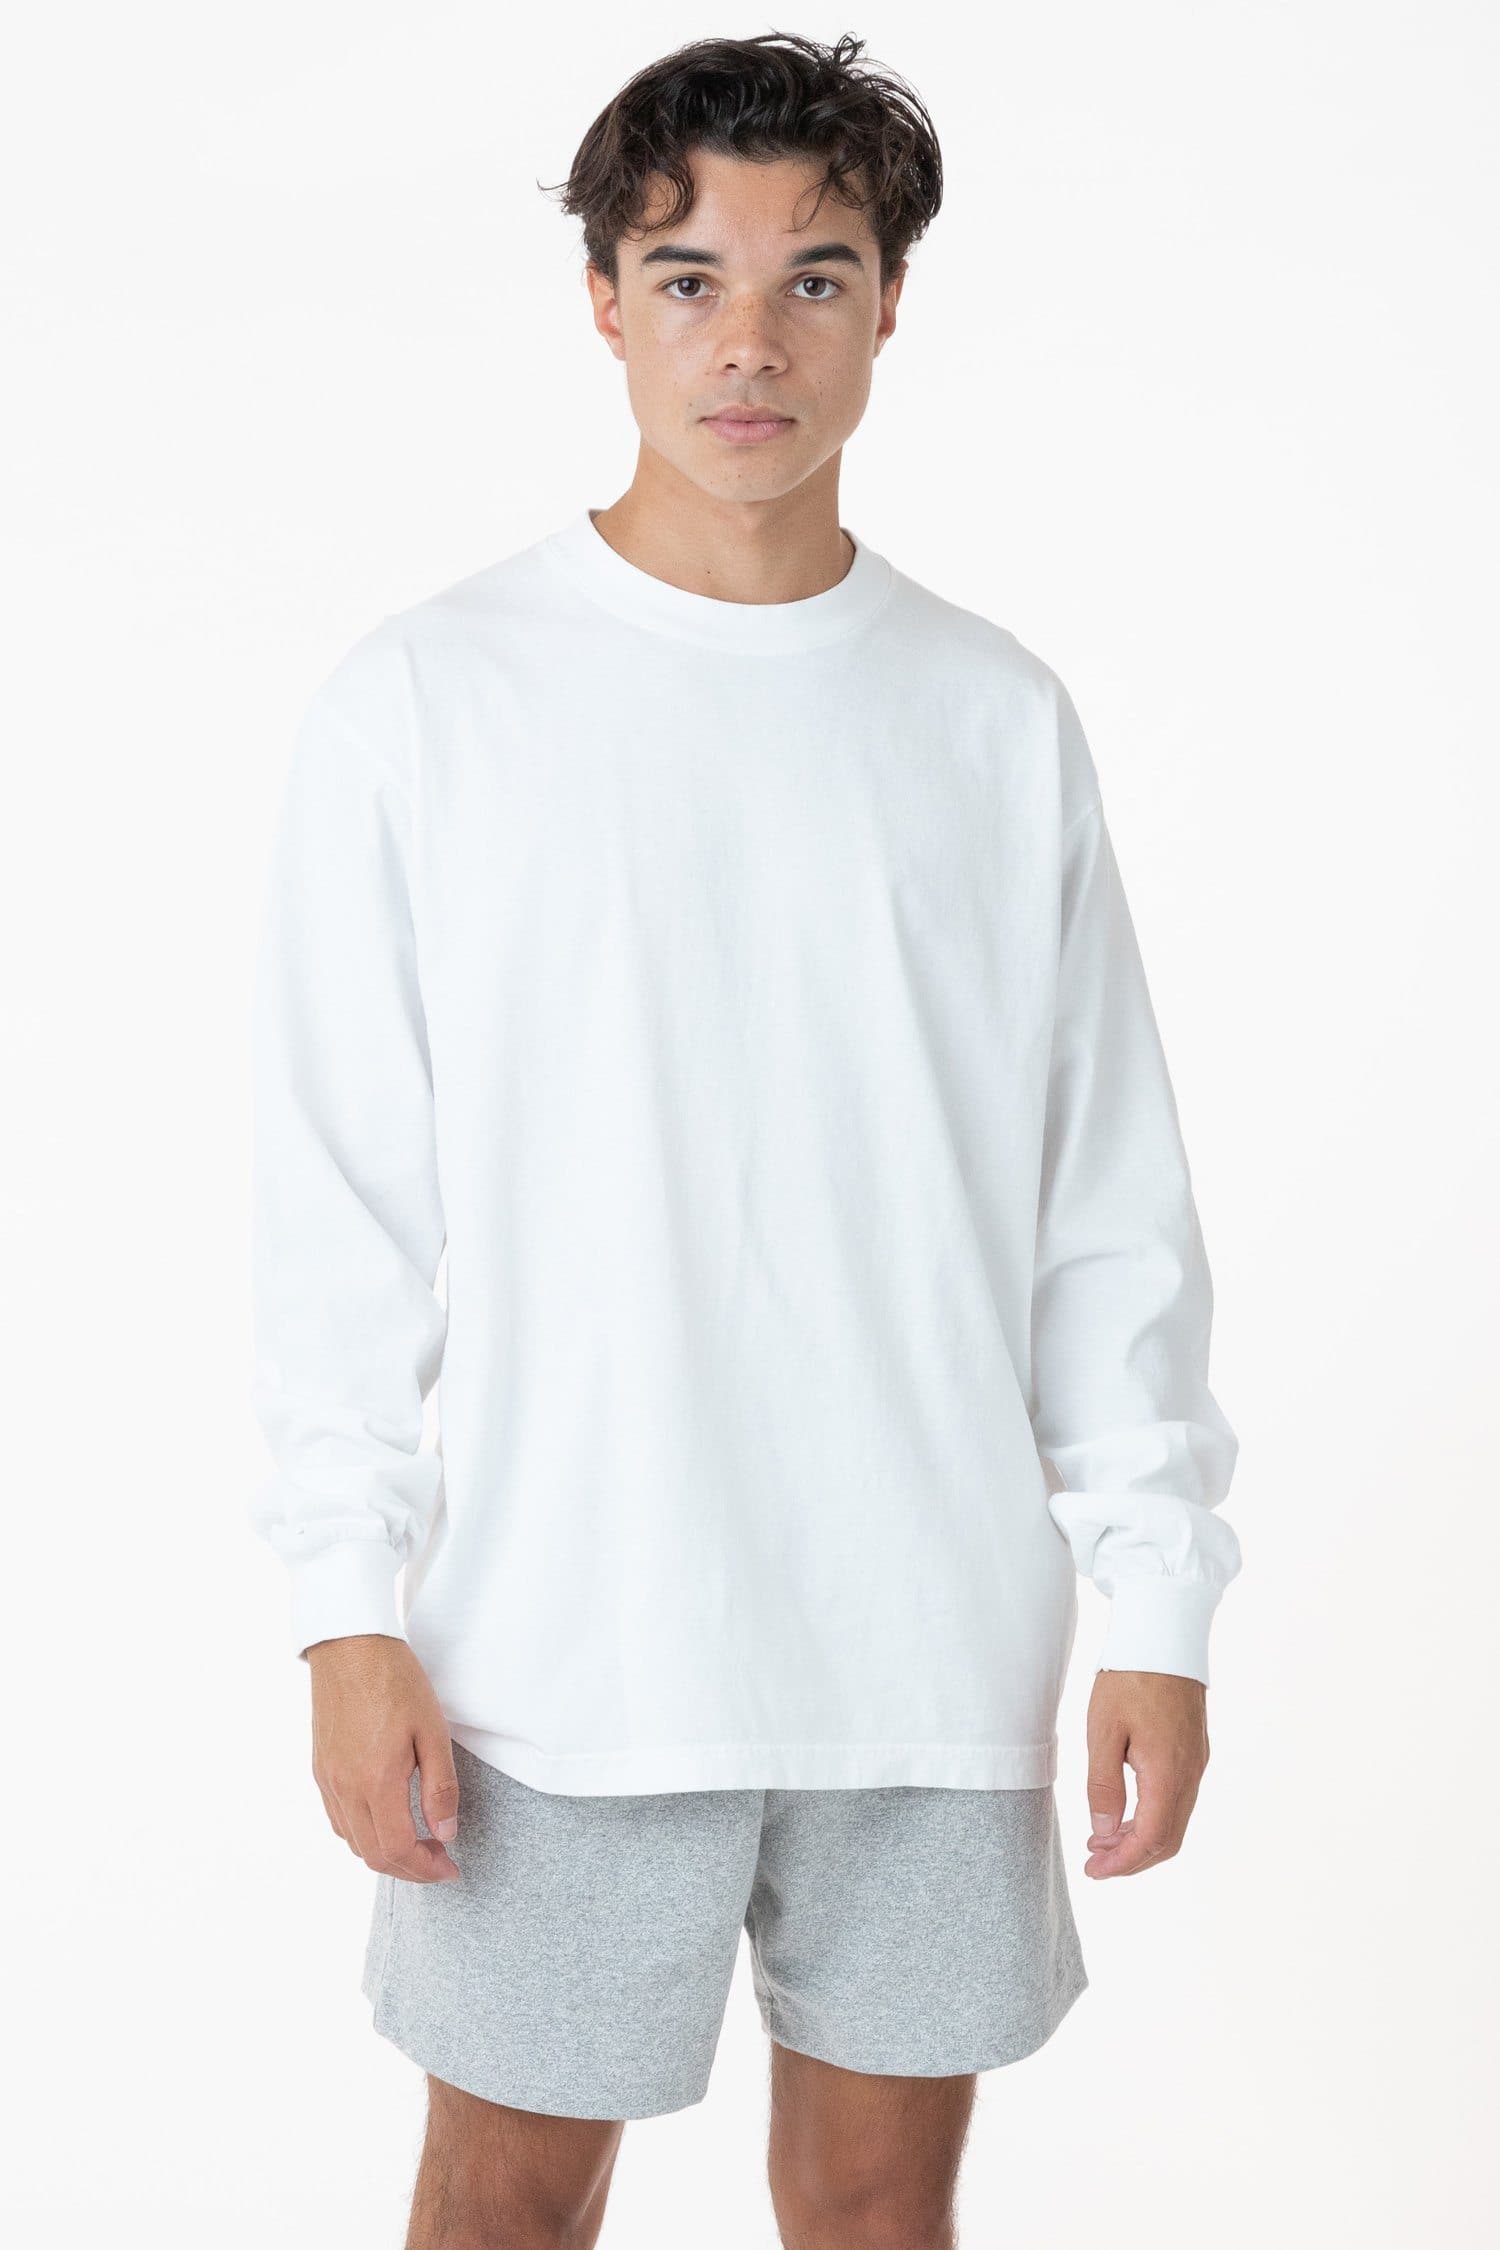 Los Angeles Apparel | Shirt for Men in Off White, Size Medium